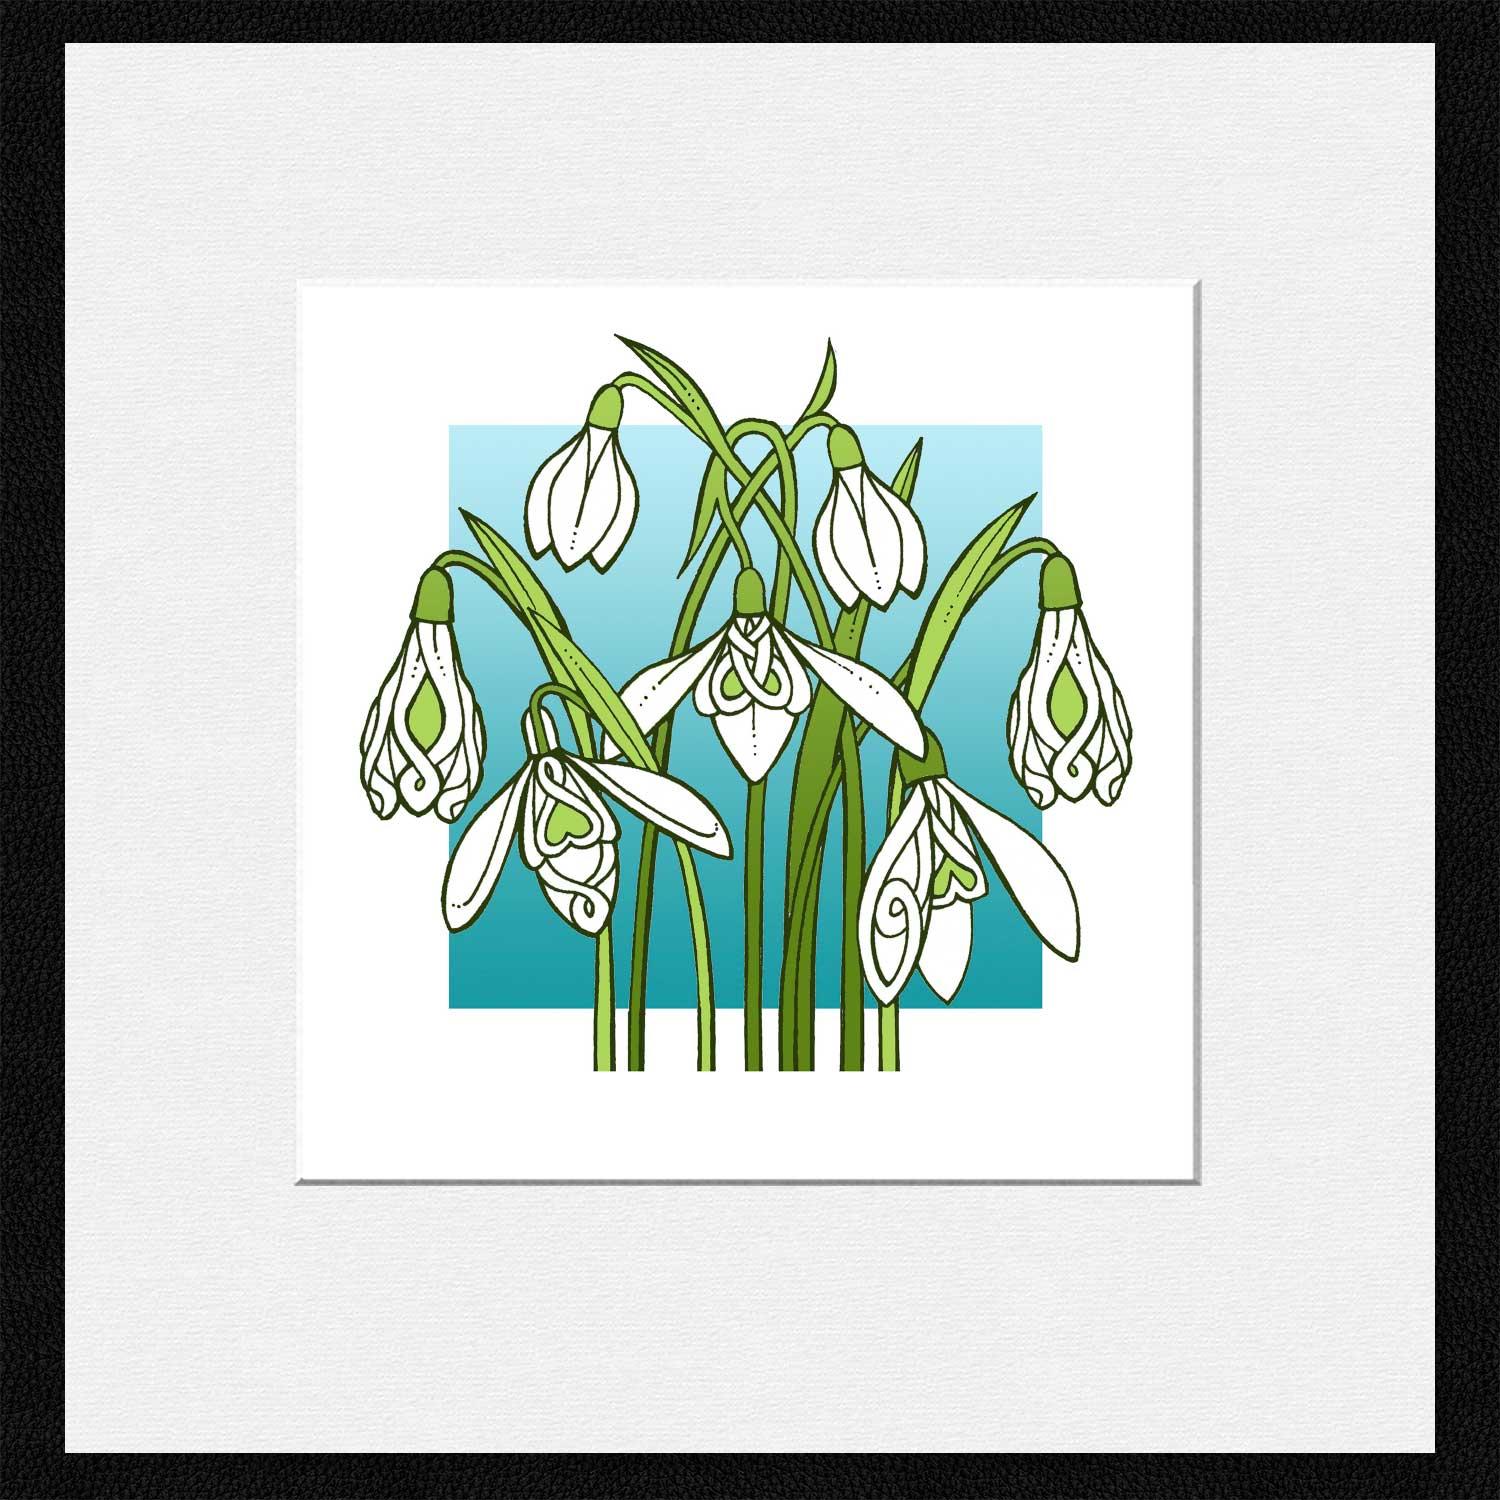 Snowdrops Mounted Card from an original painting by artist Marjory Tait